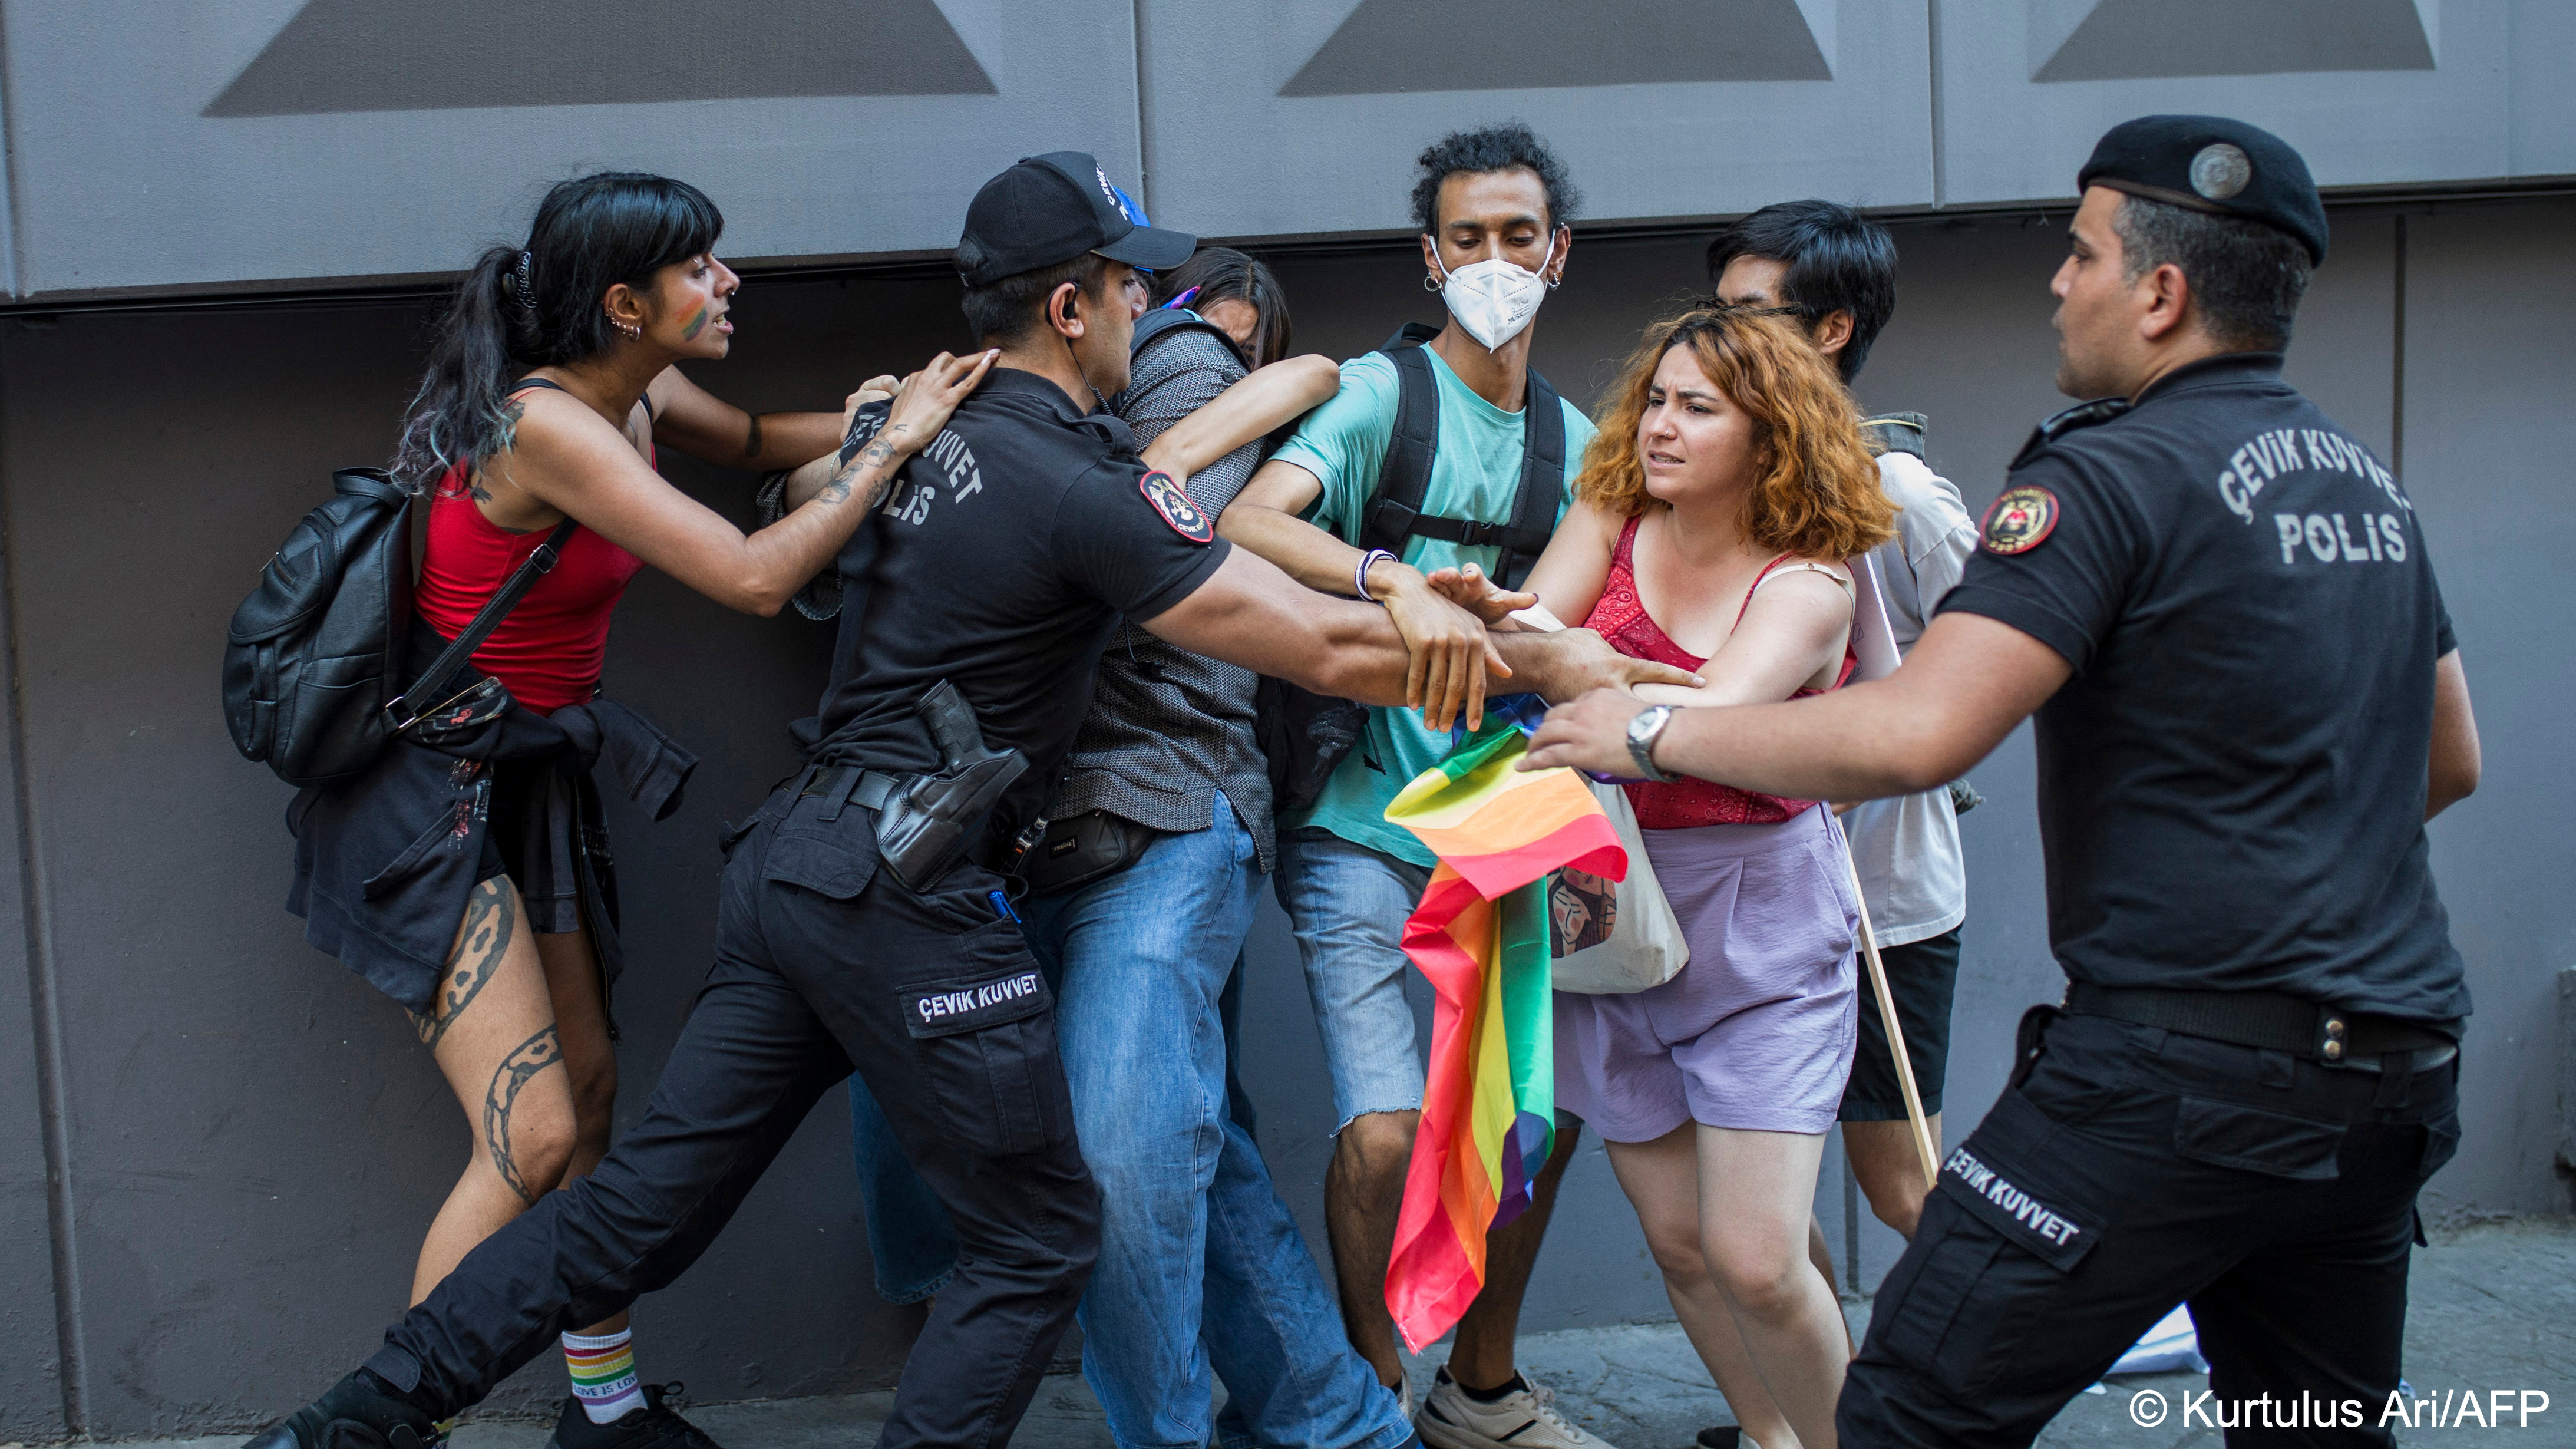 A Turkish policeman detains a demonstrator during a Pride march in Istanbul, 26 June 2022 (photo: Kurtulus Ari/AFP)